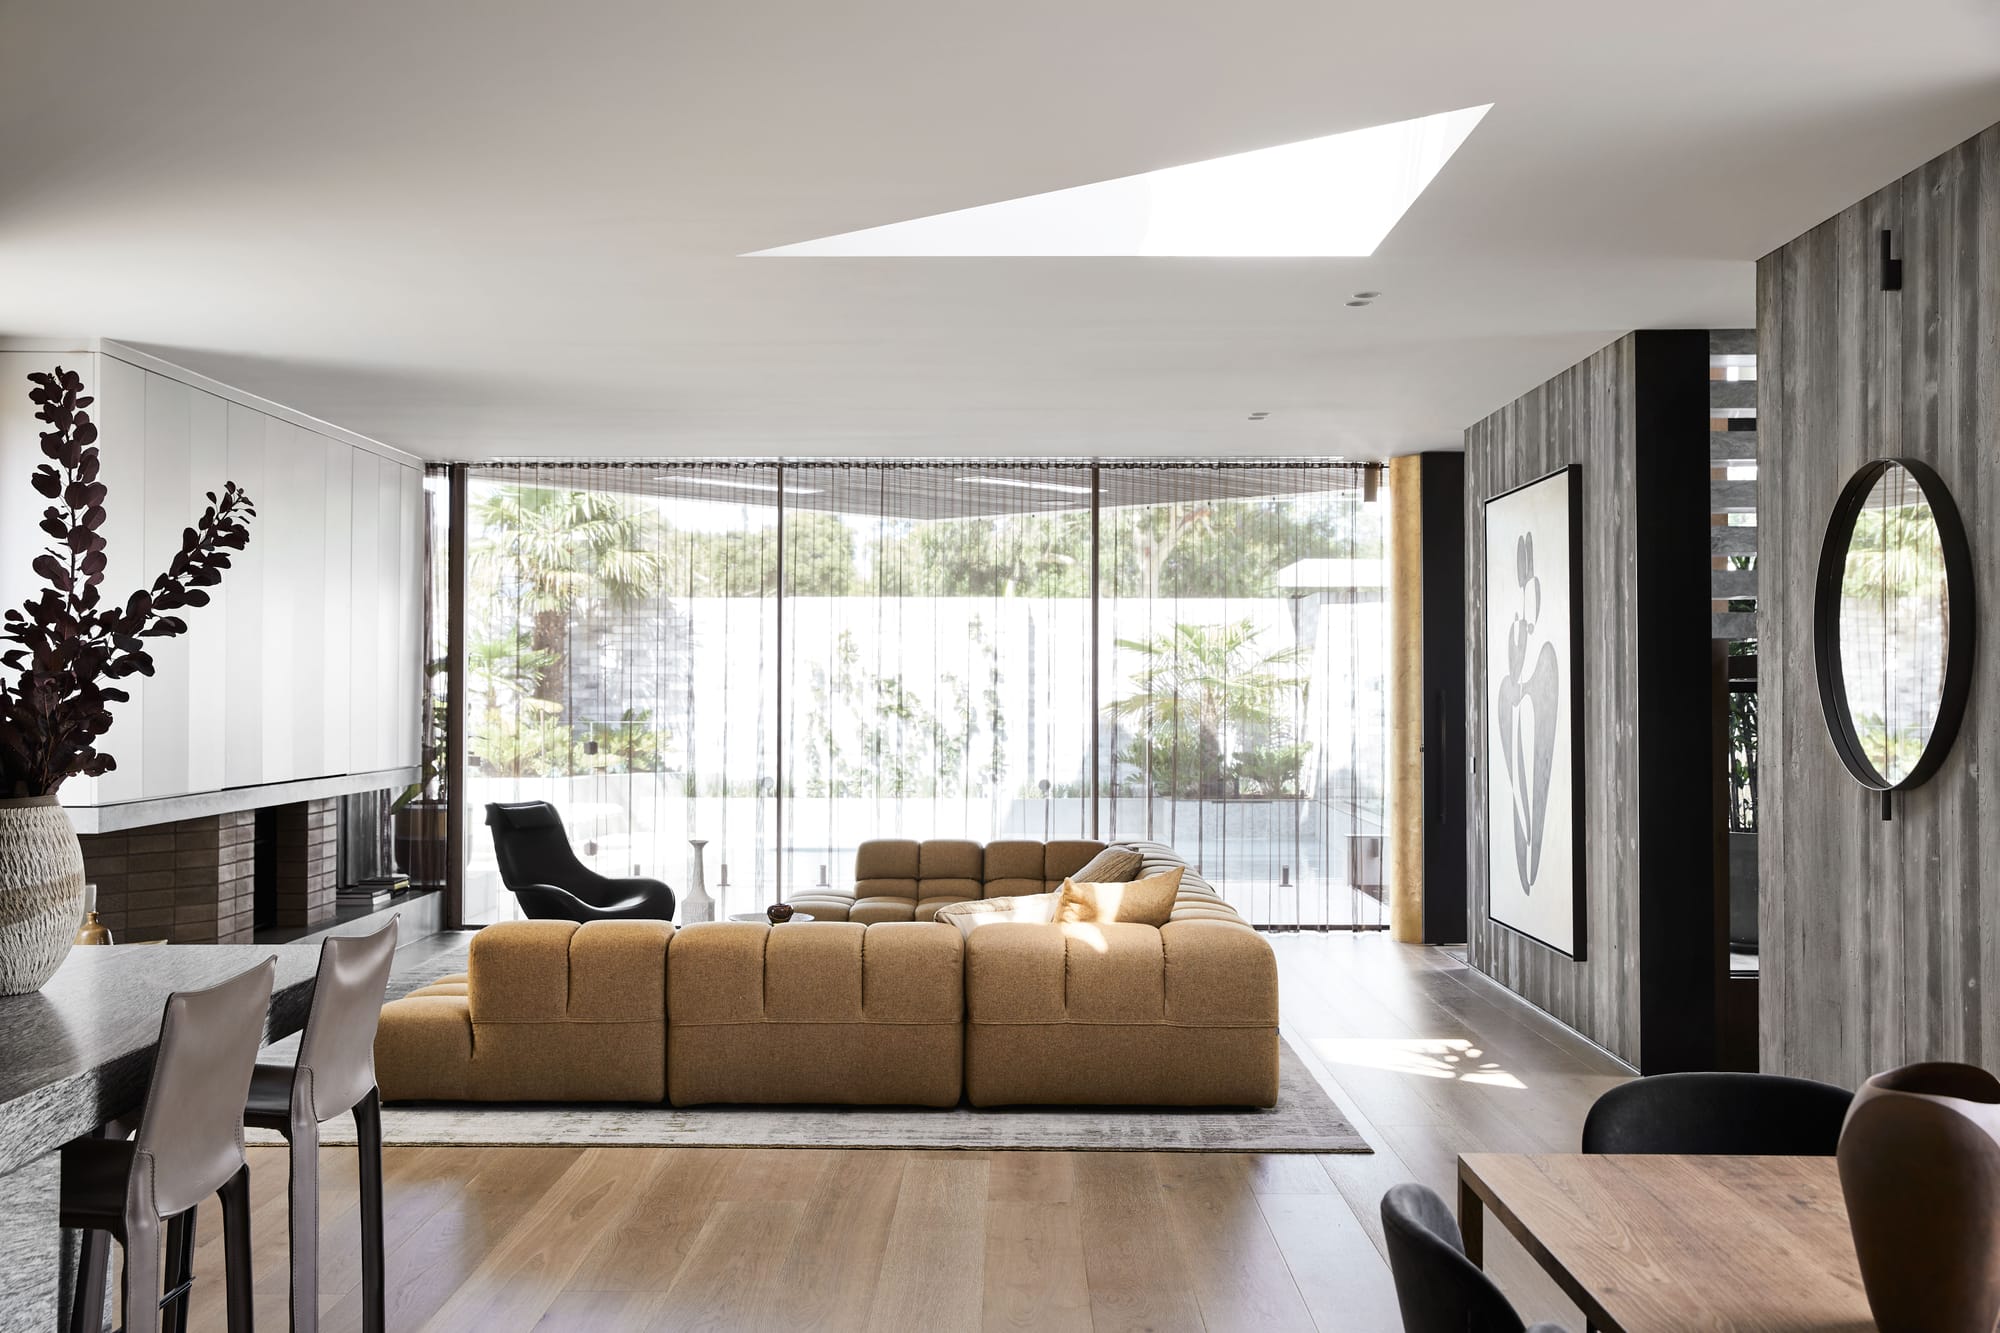 The Split Home by Seidler Group. Copyright of Seidler Group. Living room with floor-to-ceiling windows overlooking deck and pool outside. Black armchair and mustard couch inside. 